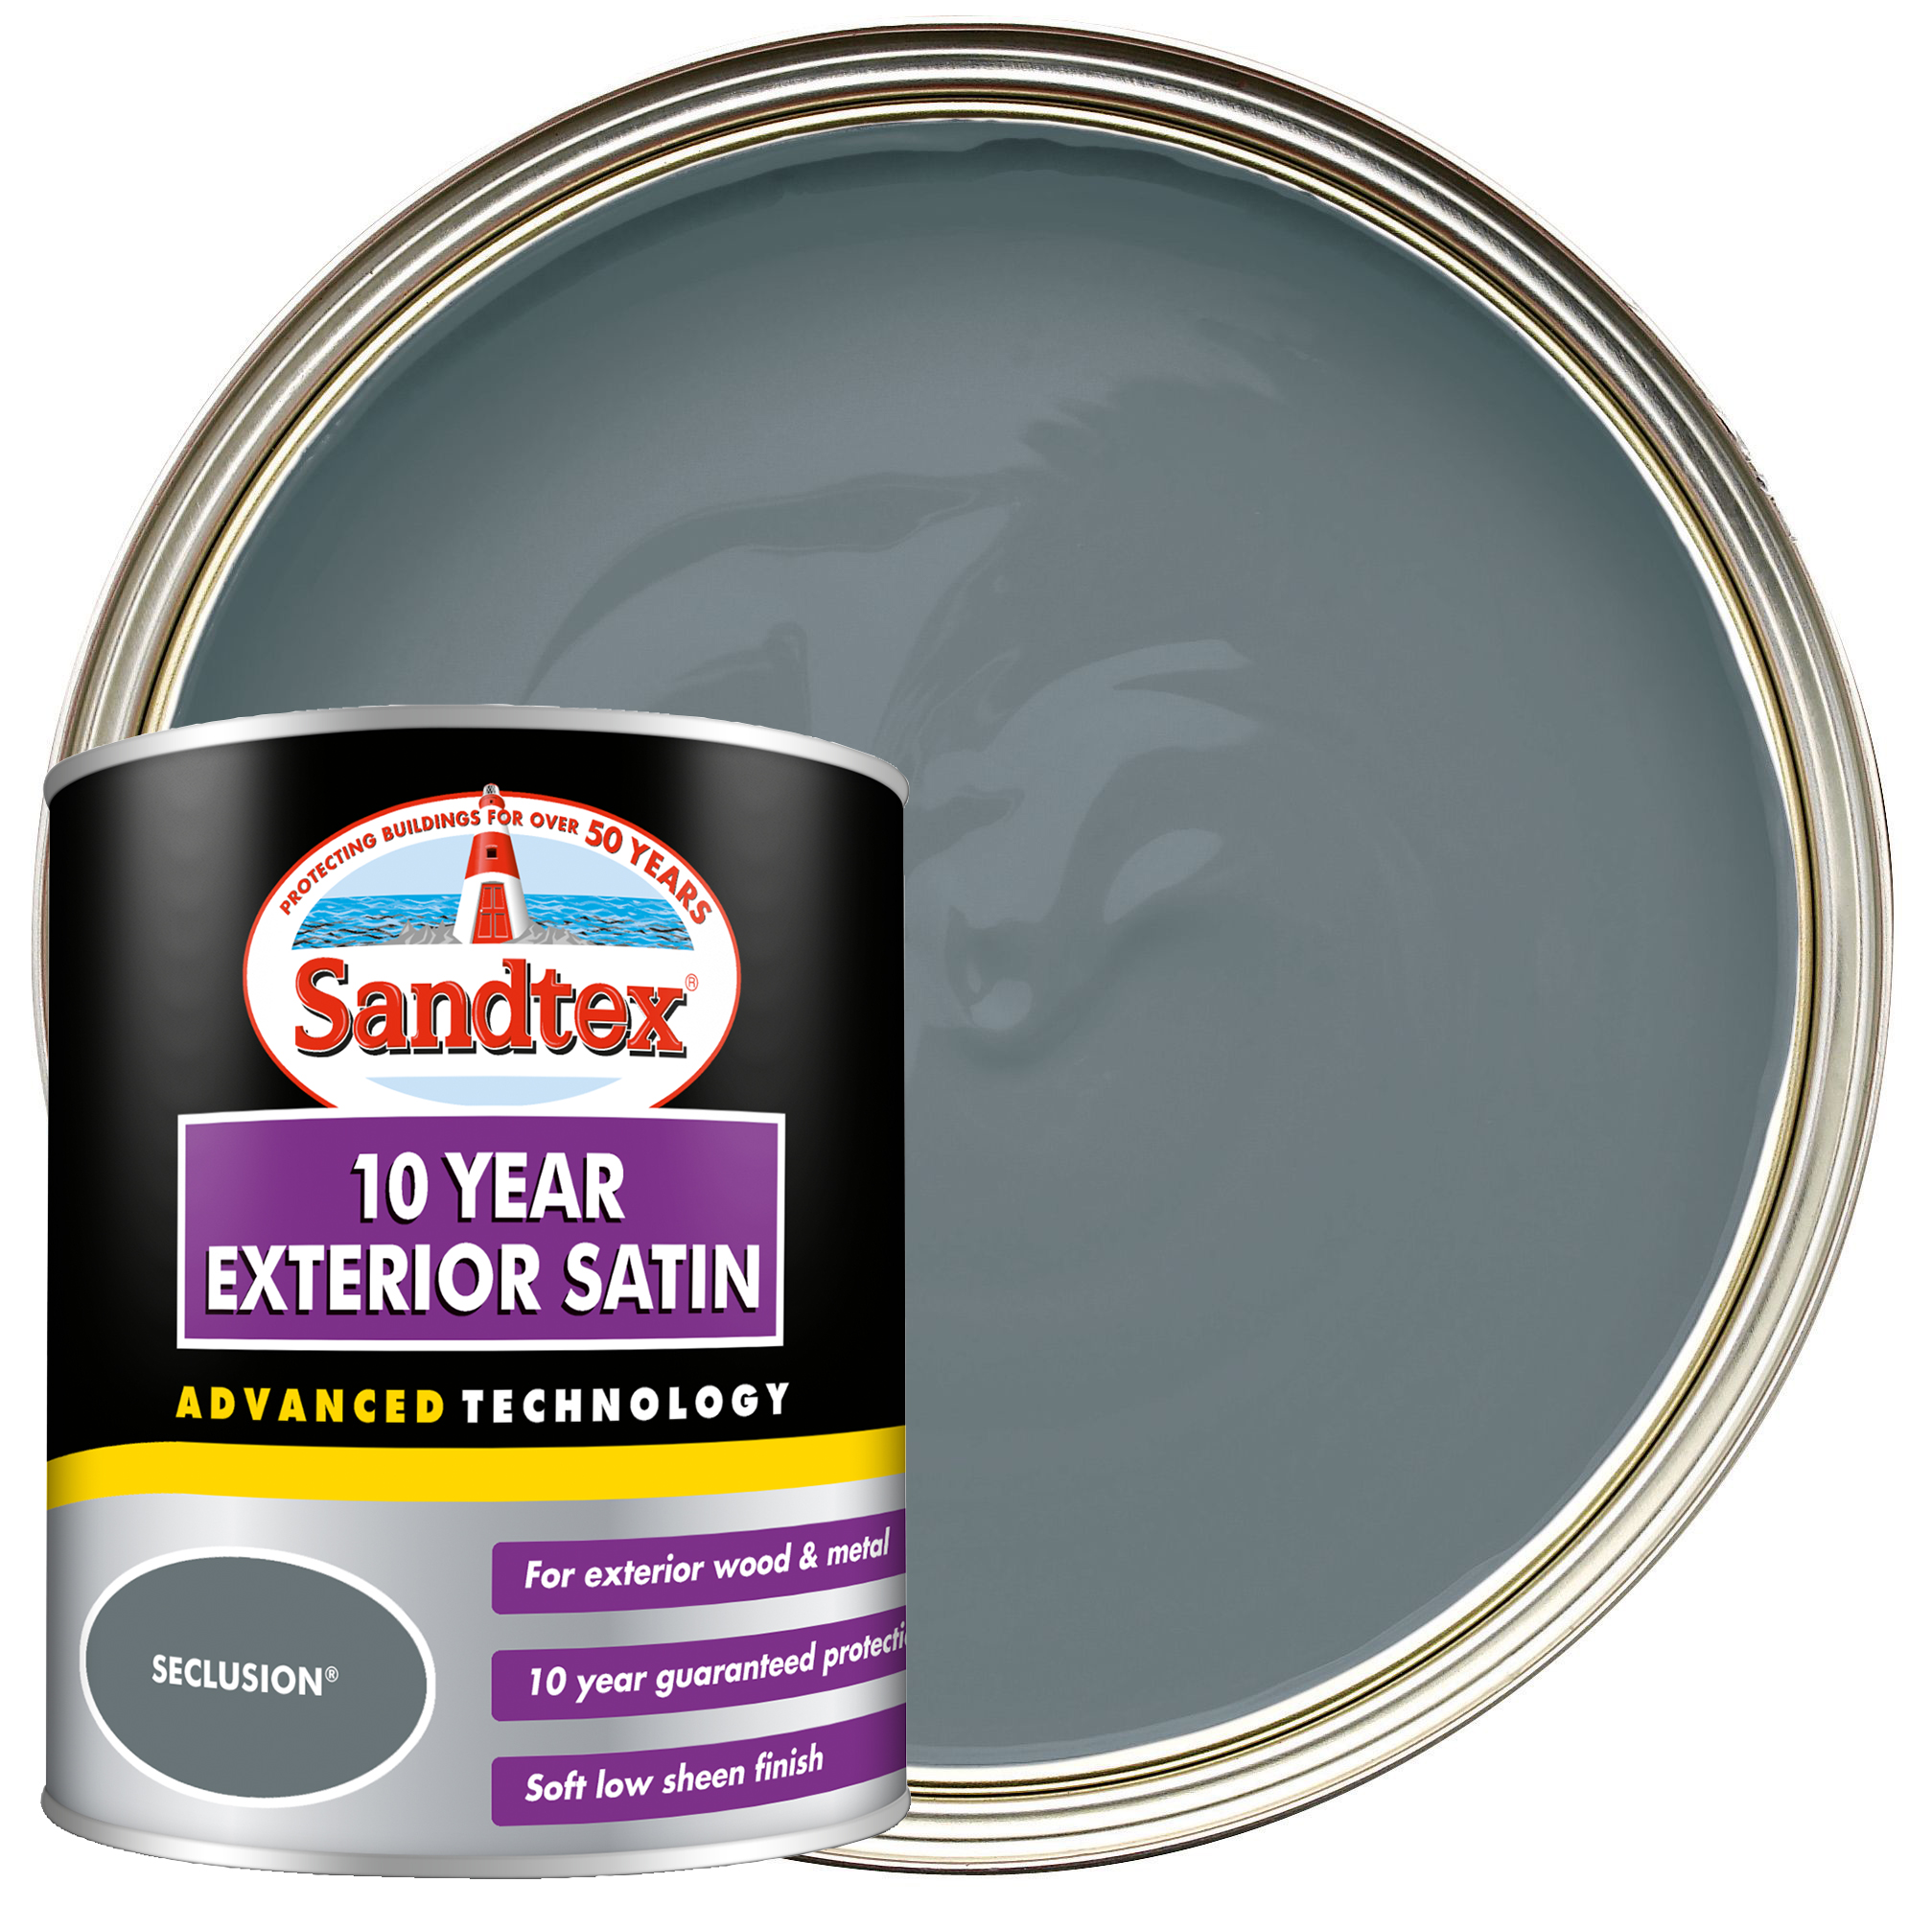 Image of Sandtex 10 Year Exterior Satin Paint - Seclusion - 750ml